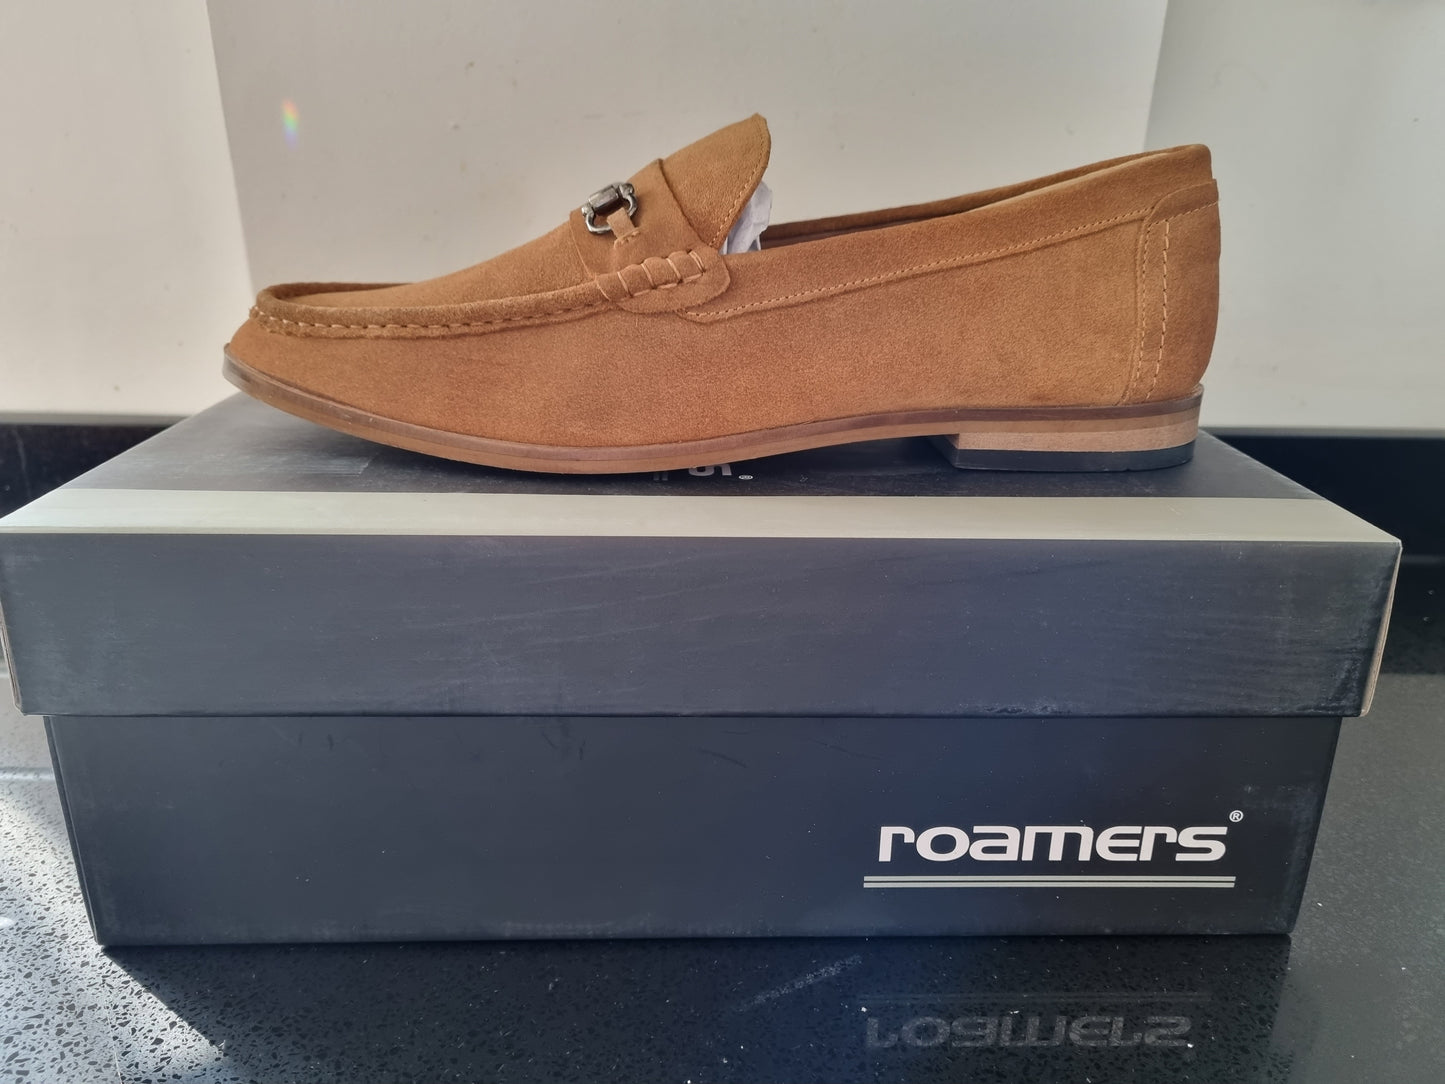 Loafer by Roamers - Sand Casual Slip On (M595BS)